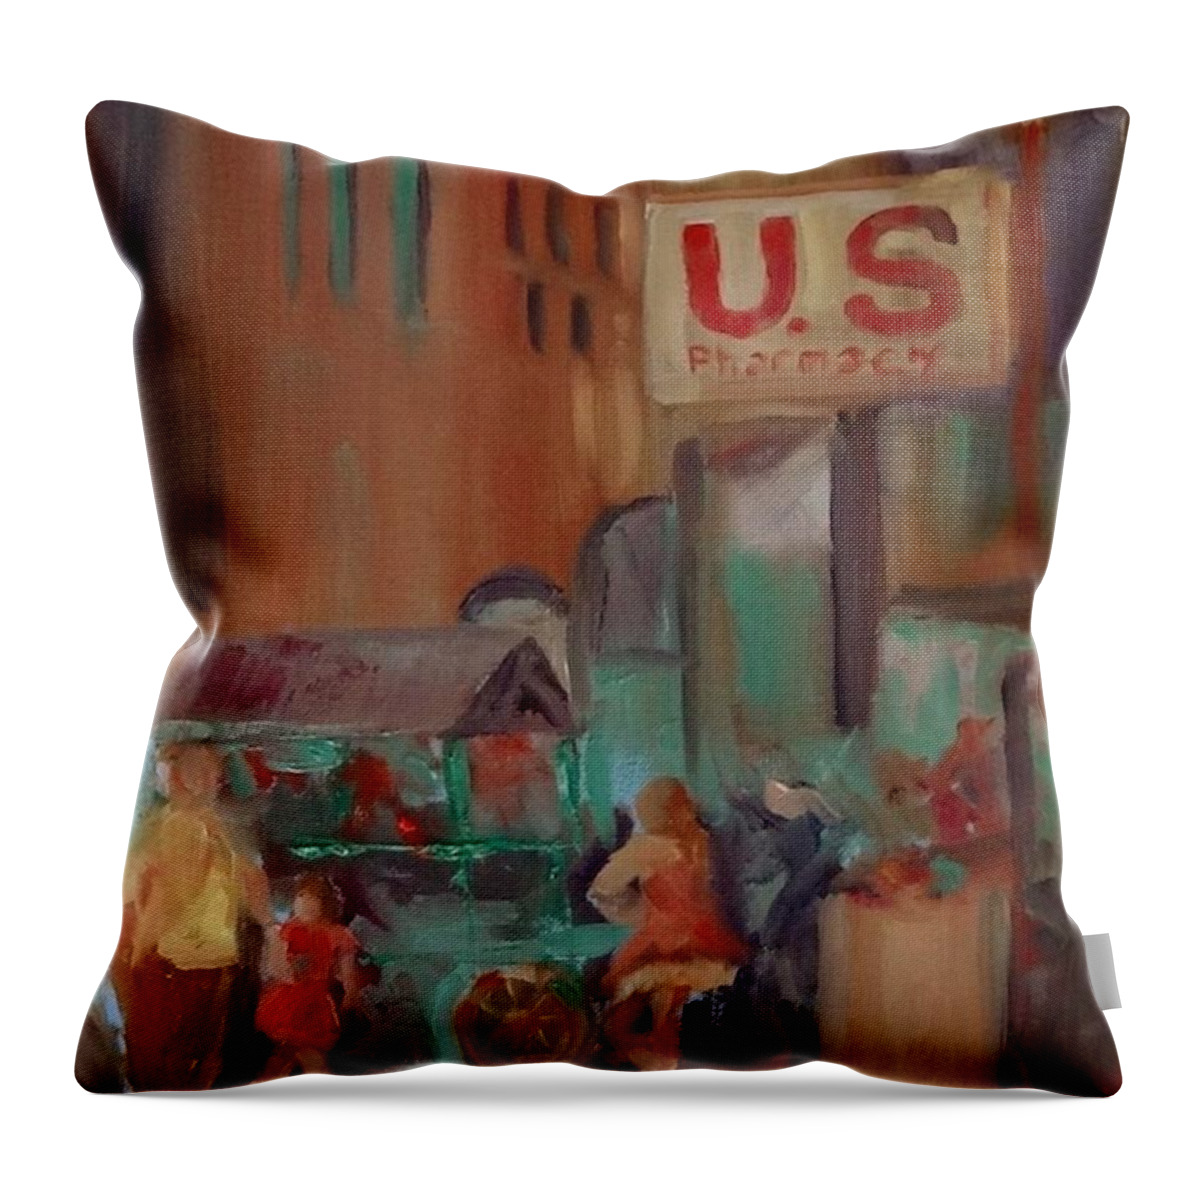 Mexico Street Scene Throw Pillow featuring the painting US Pharmacy by Carol Berning